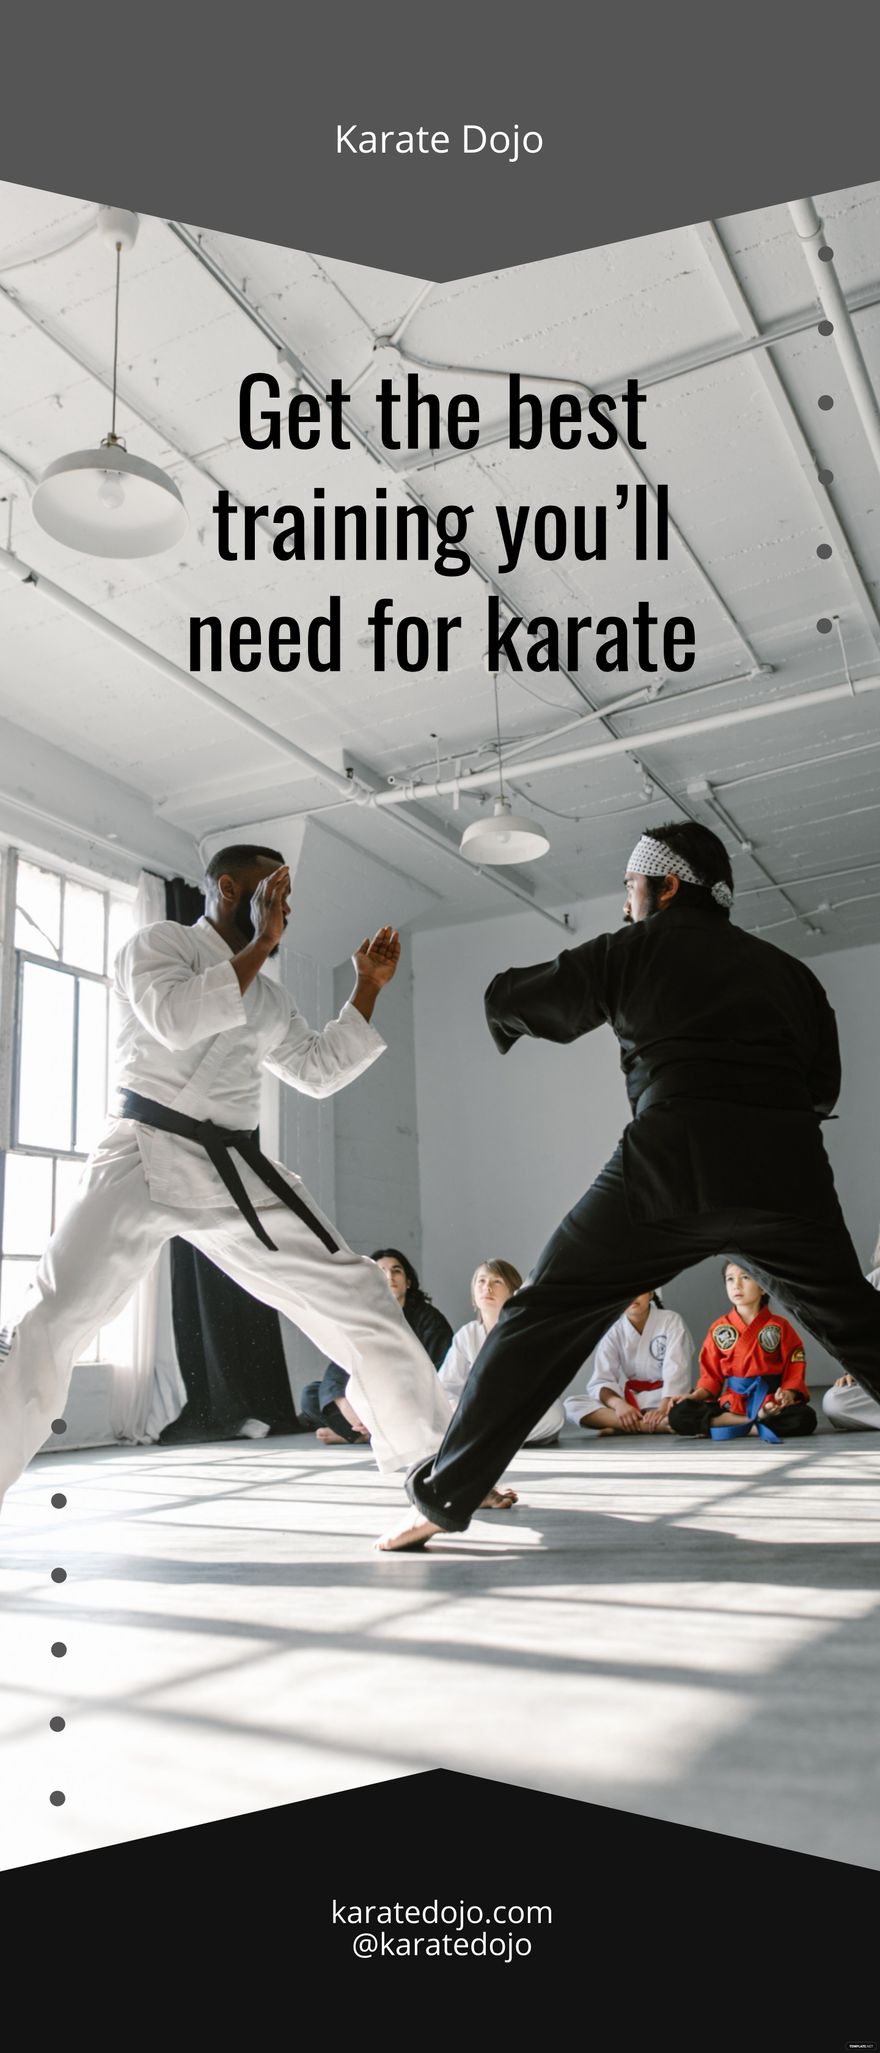 Free Karate Training Roll Up Banner Template